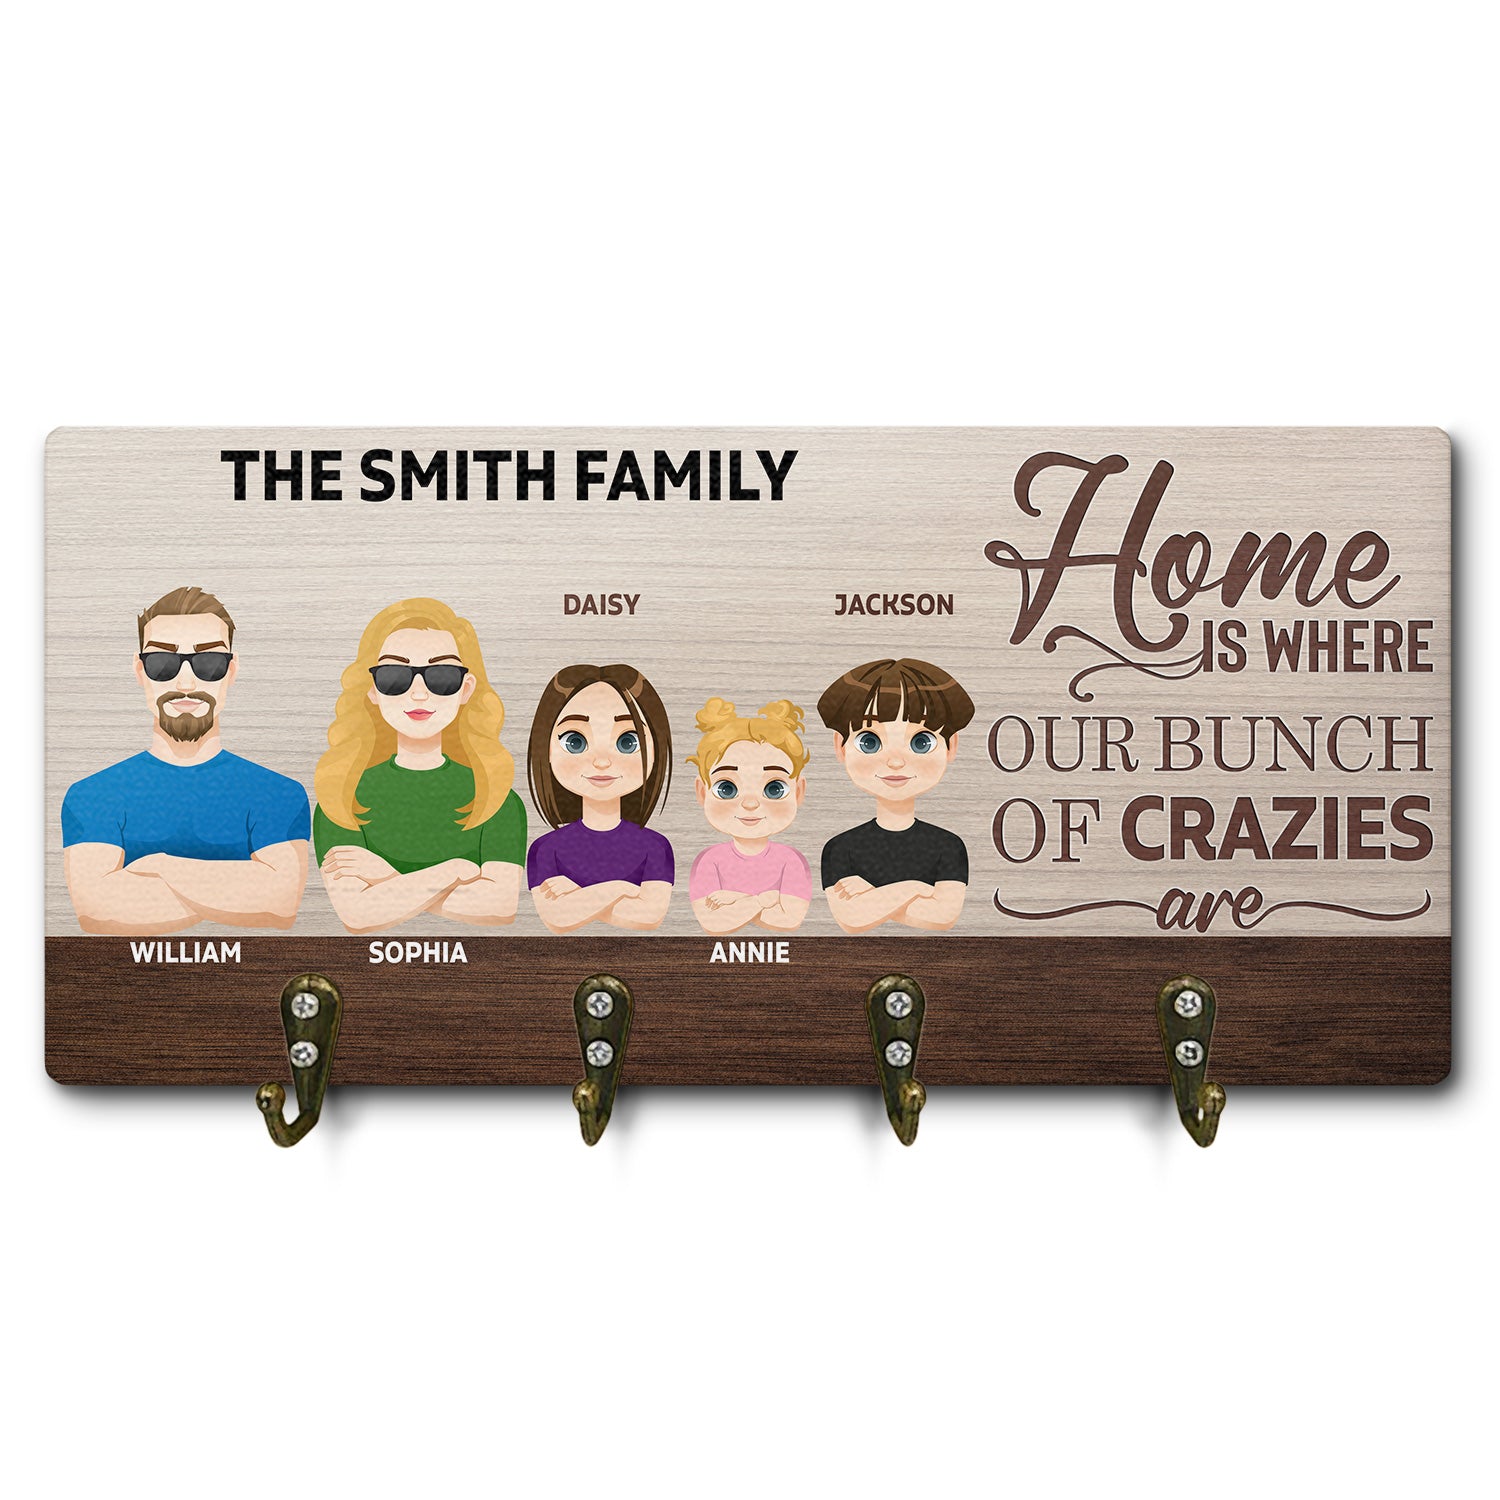 Home Is Where Our Bunch Of Crazies Are - Birthday, Decor, Housewarming, Anniversary, Funny Gift For Couple, Parents, Family - Personalized Wood Key Holder